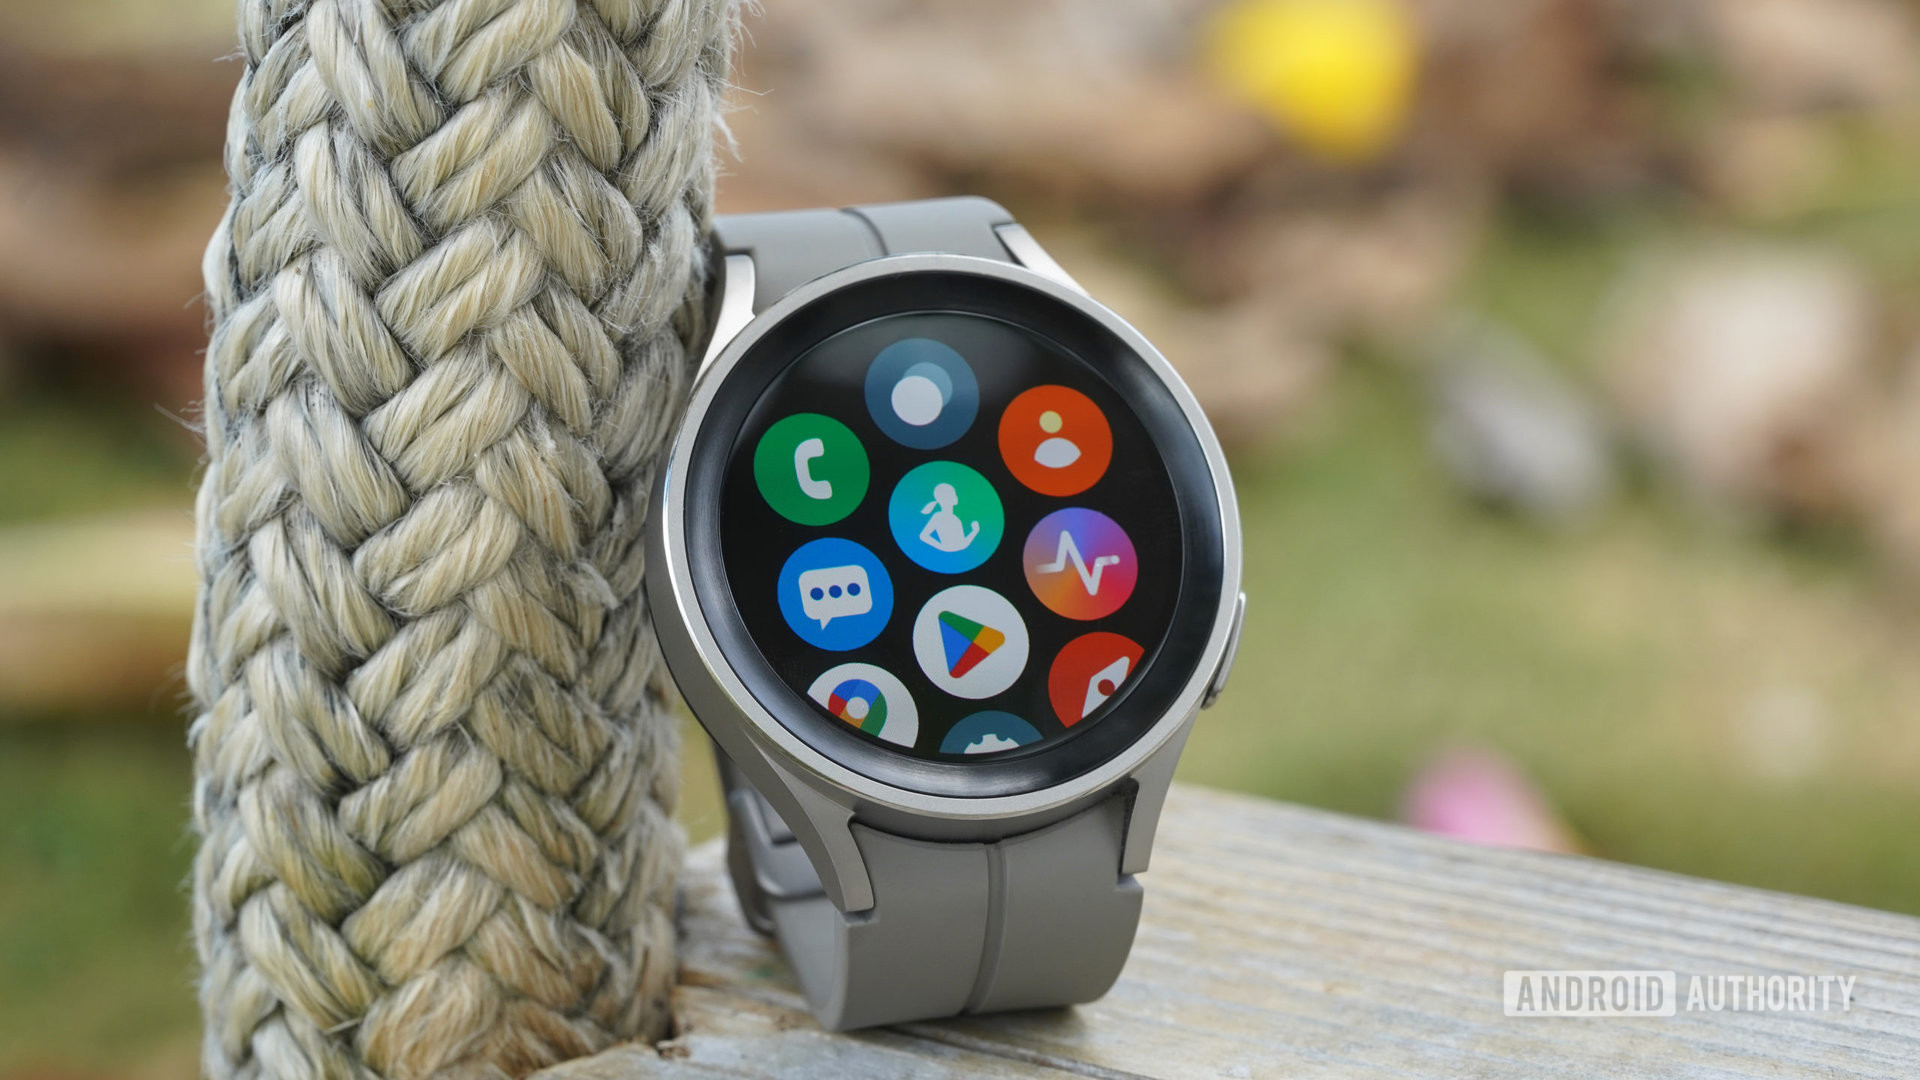 What is Android Wear OS and how does it work?